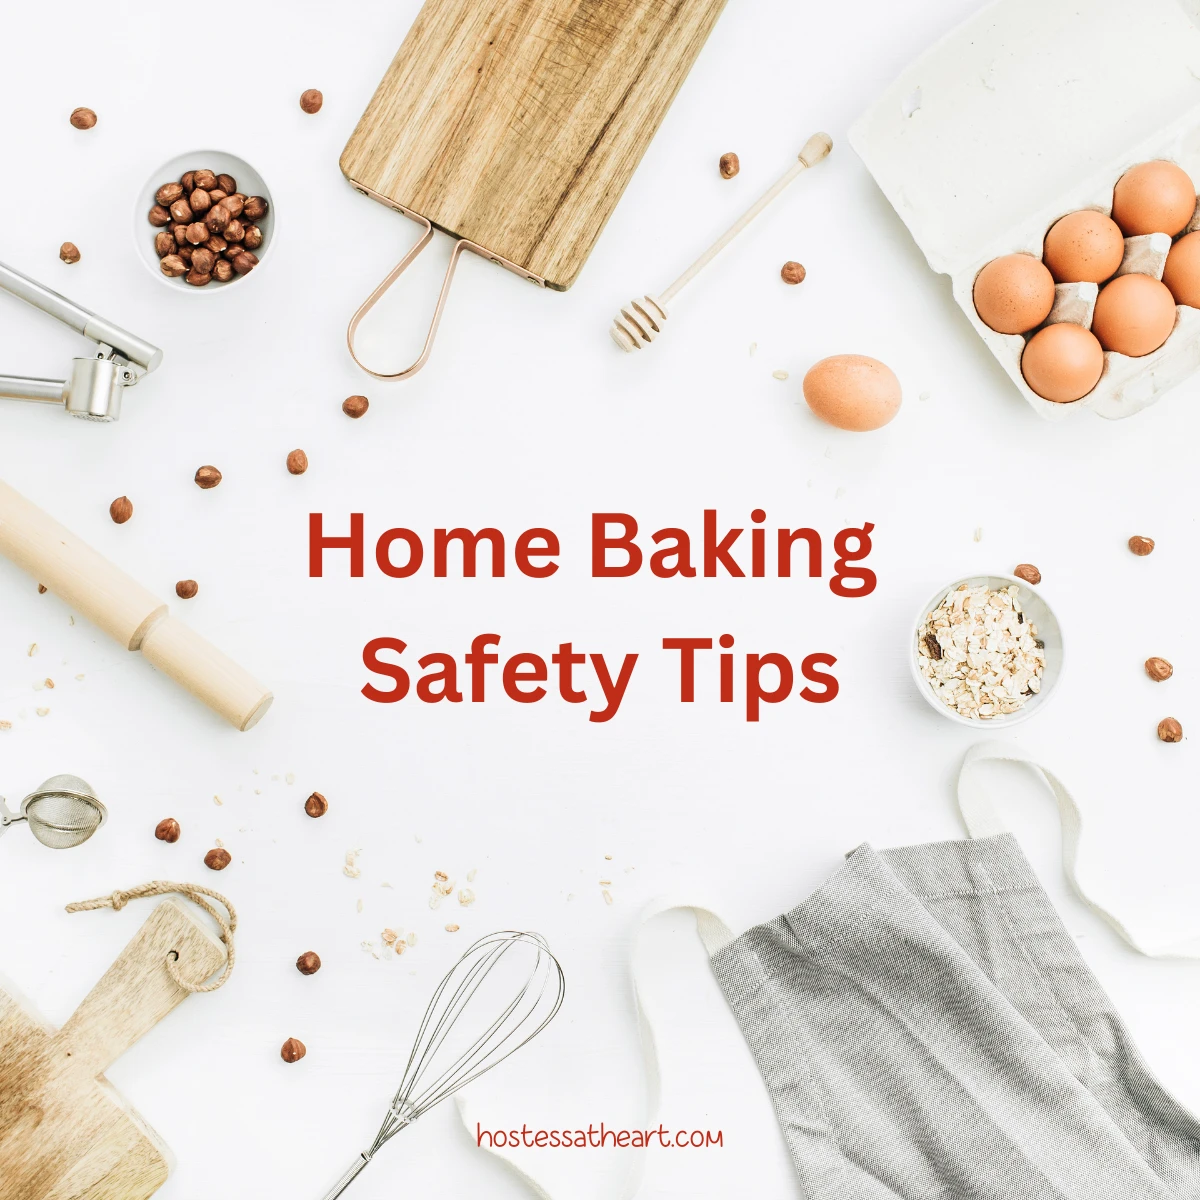 Stock photo of baking ingredients and equipment used as a background for Home Baking Safety Tips